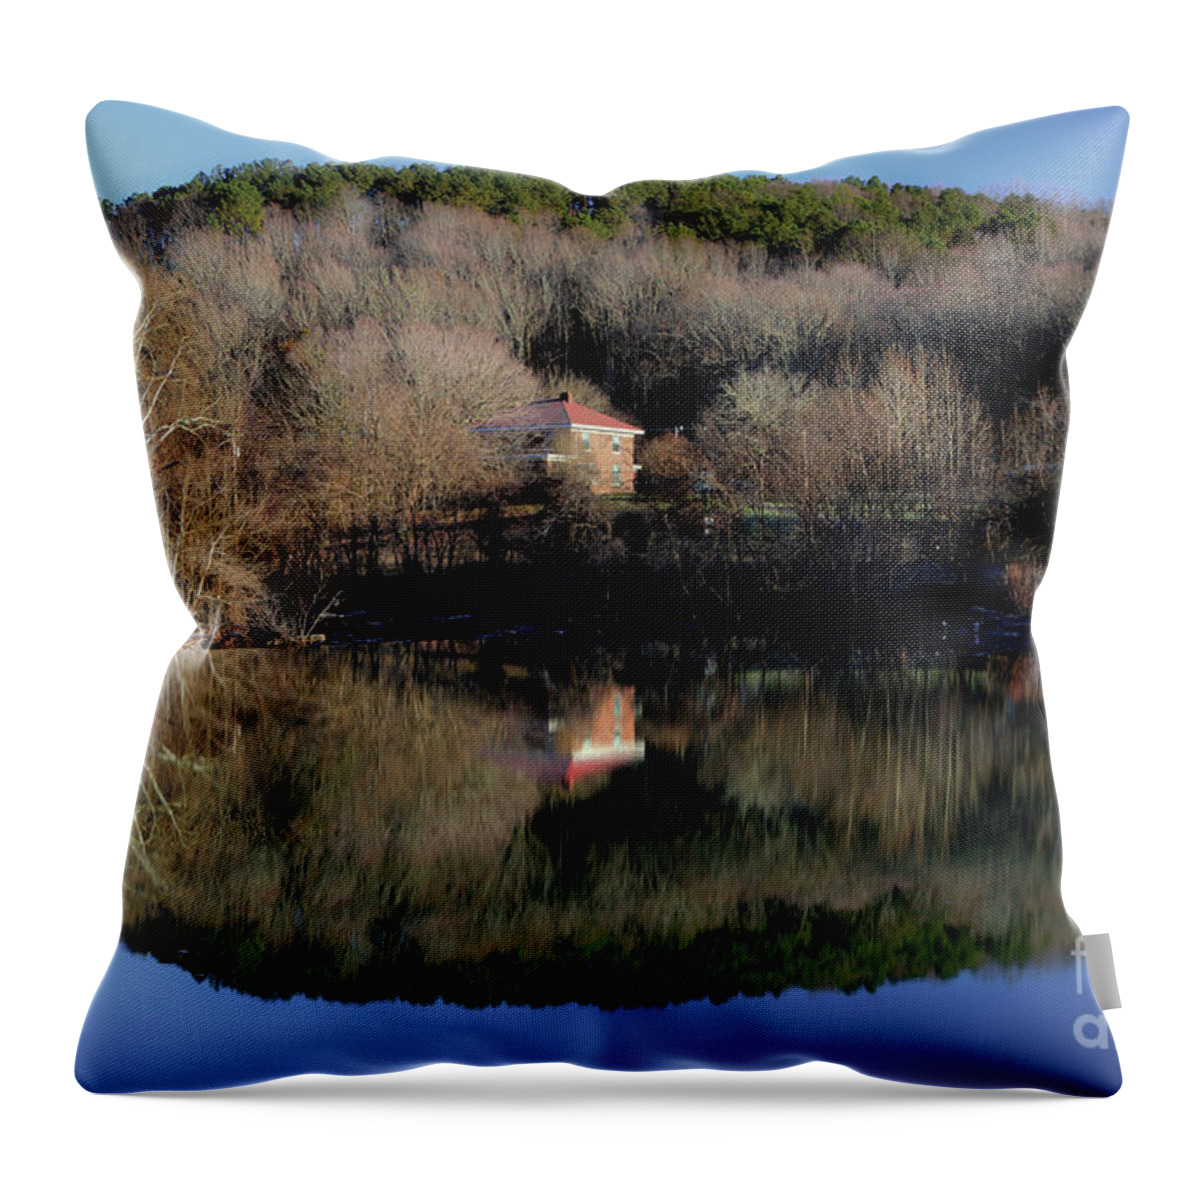 River Reflection Throw Pillow featuring the photograph Above The Waterfall Reflection by Michael Eingle